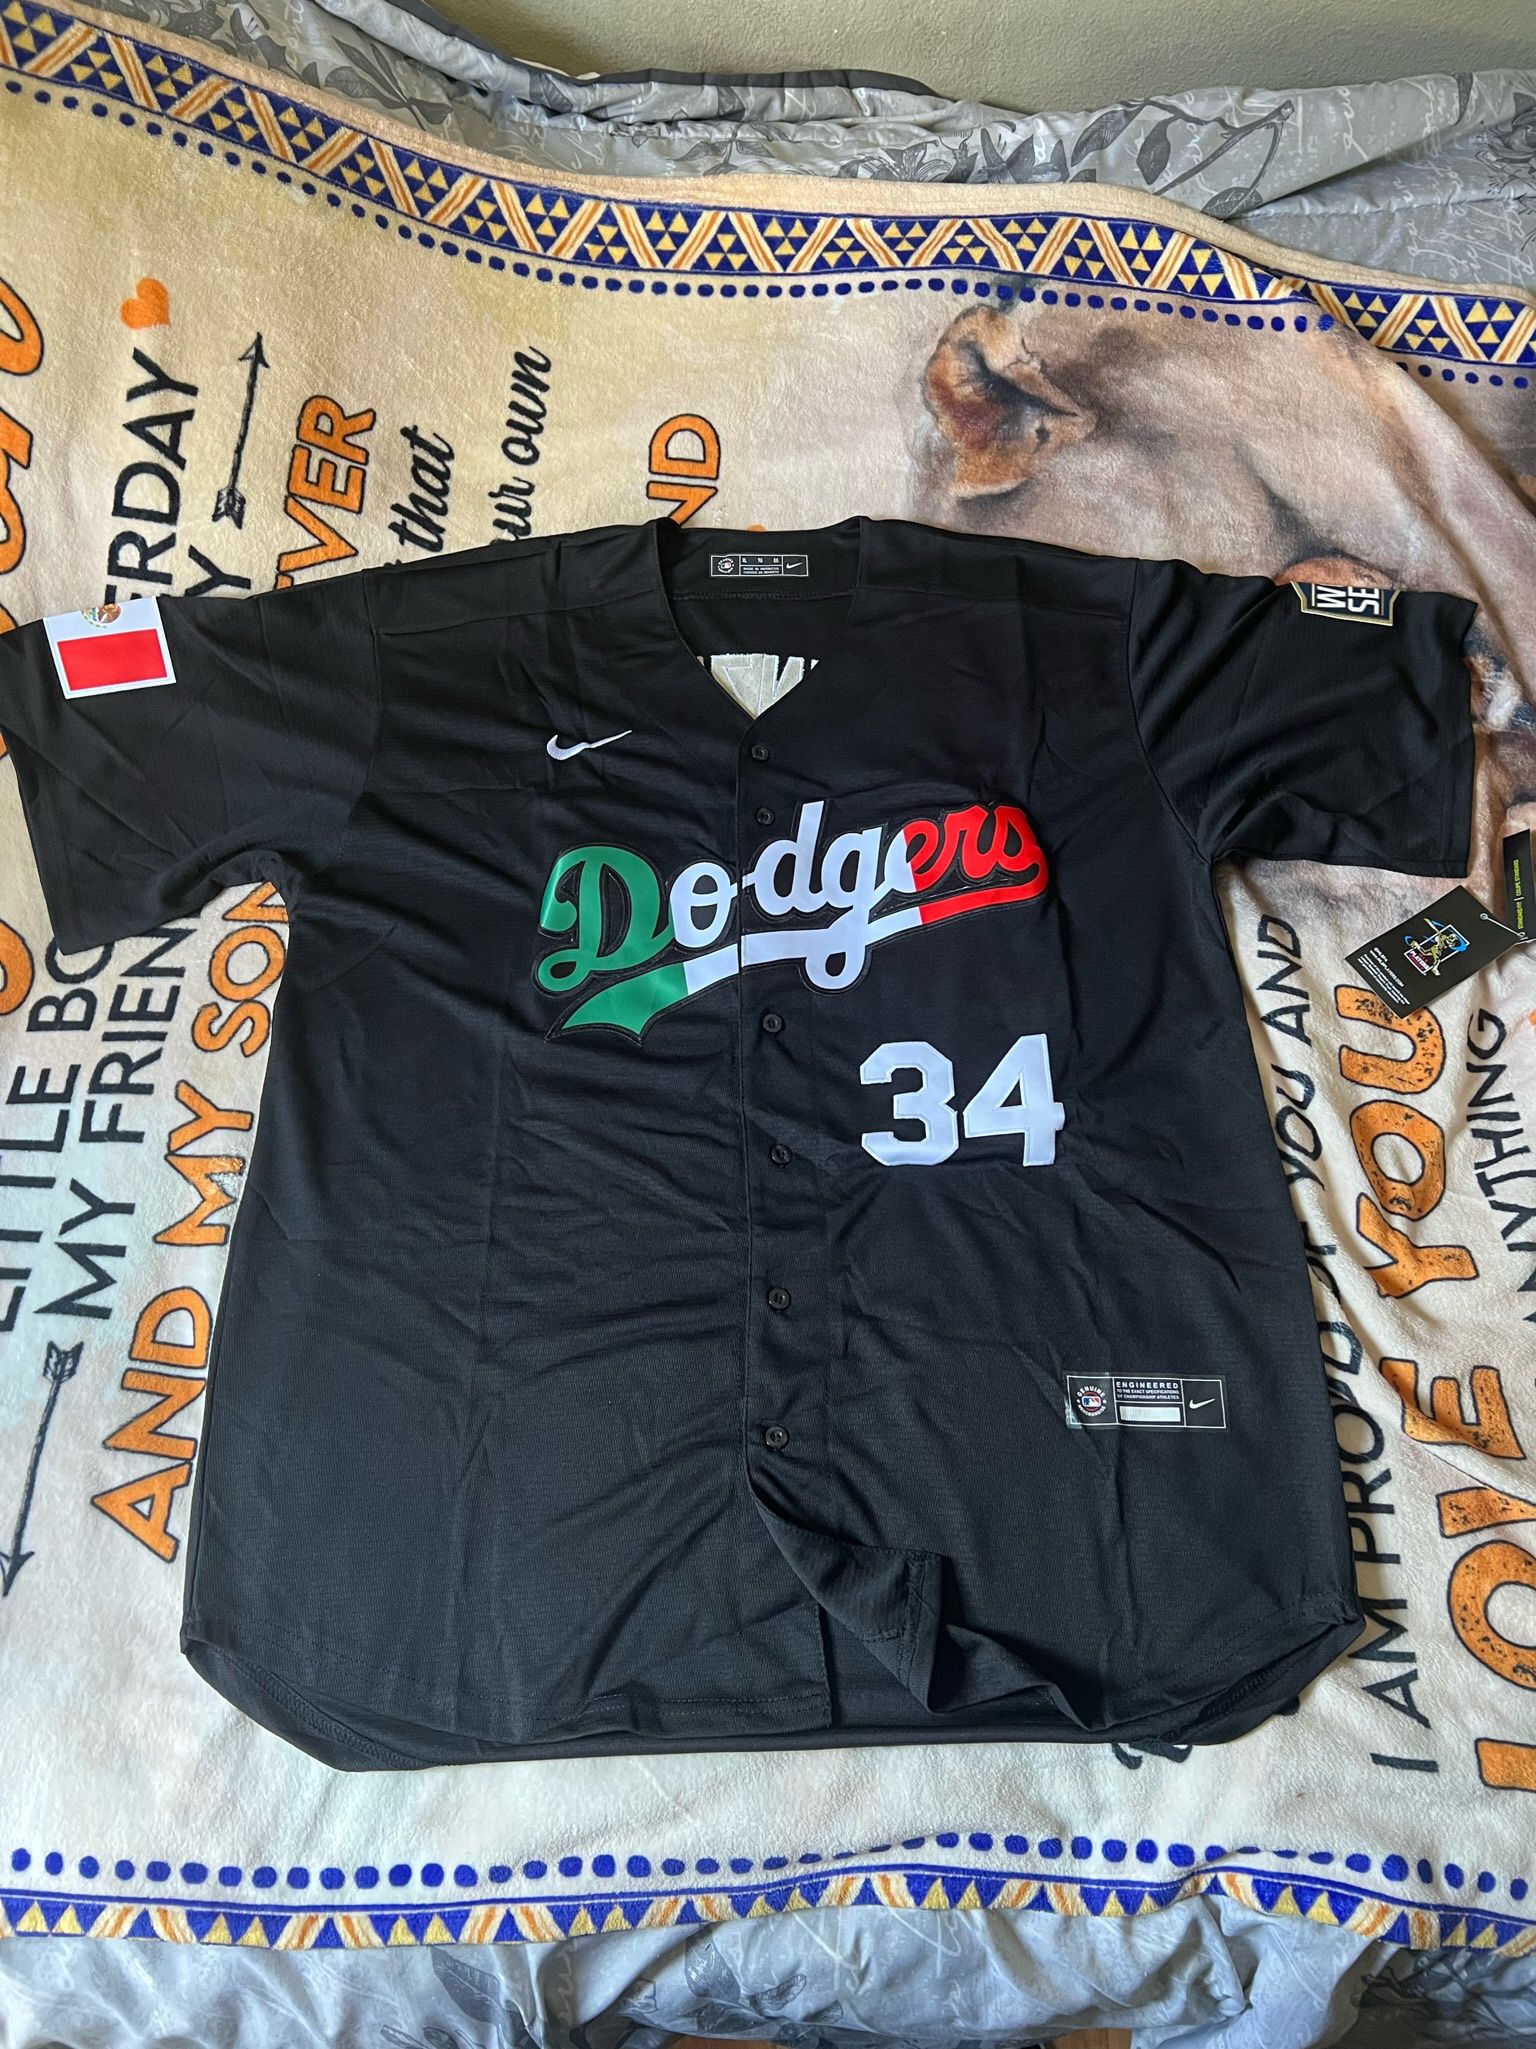 Dodgers Jersey Valenzuela #34 Heritage Mexico for Sale in Whittier, CA -  OfferUp